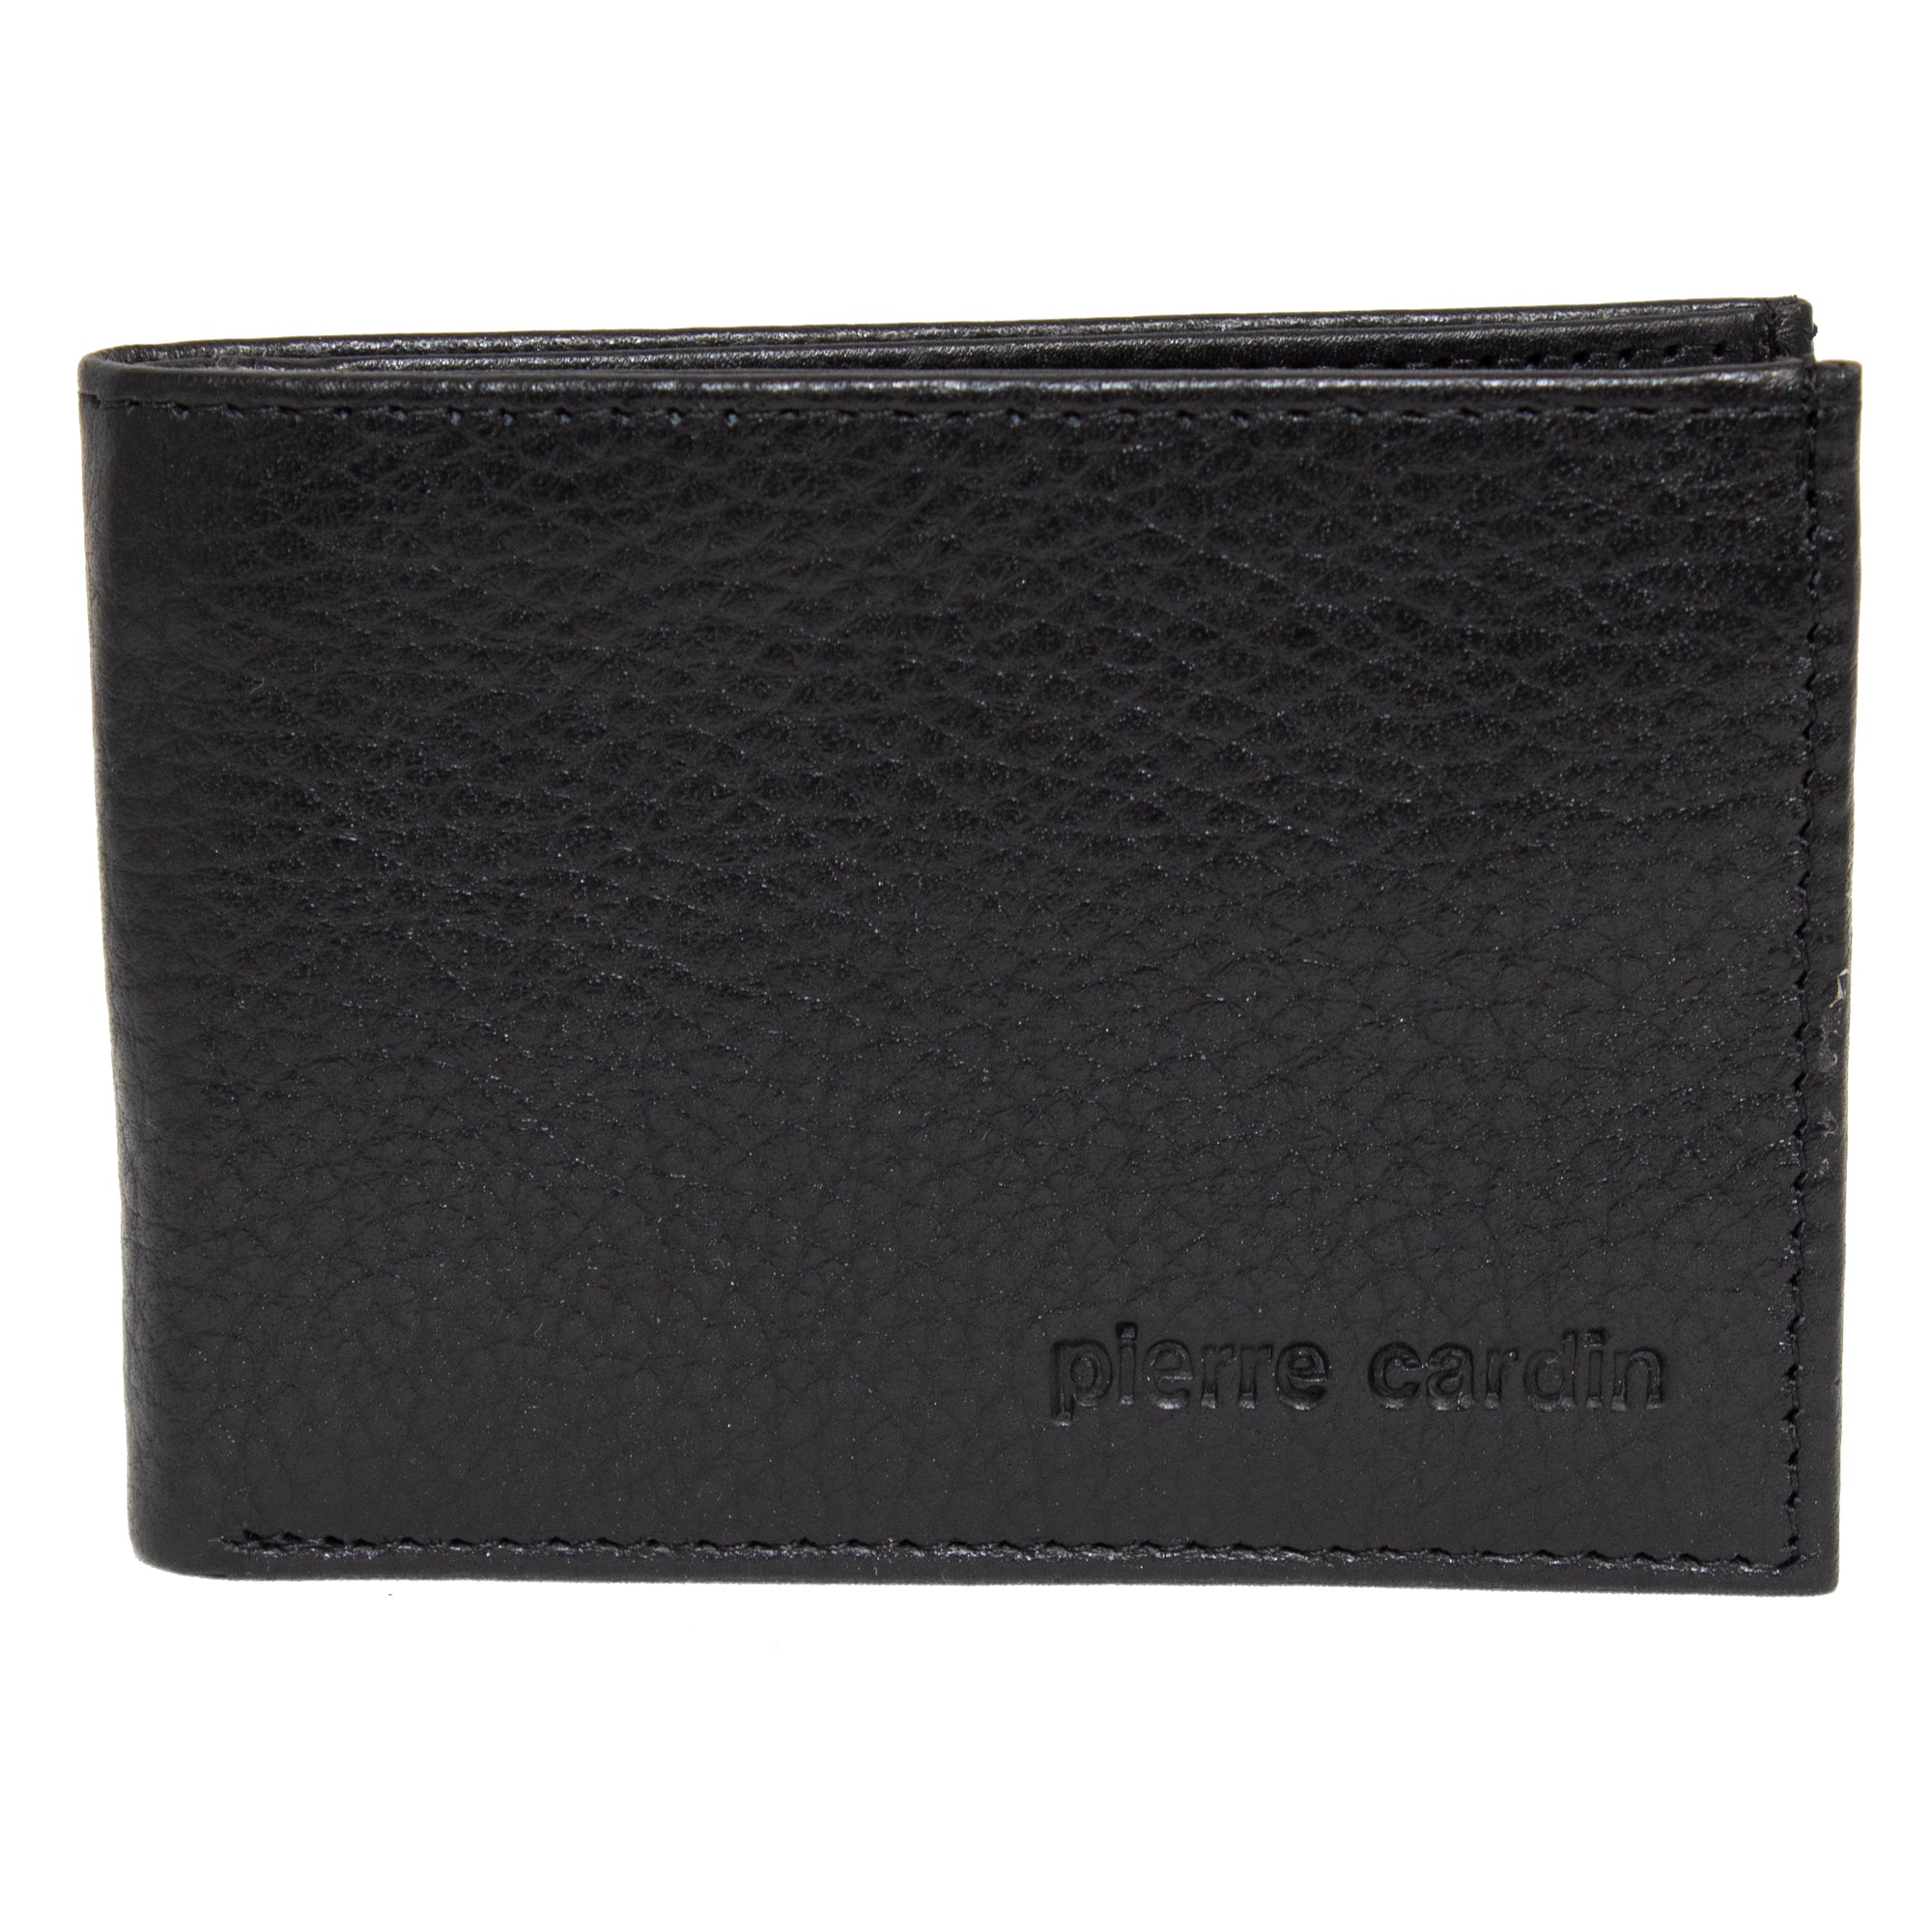 Pierre Cardin Leather Wallet - Mainstreet Clothing